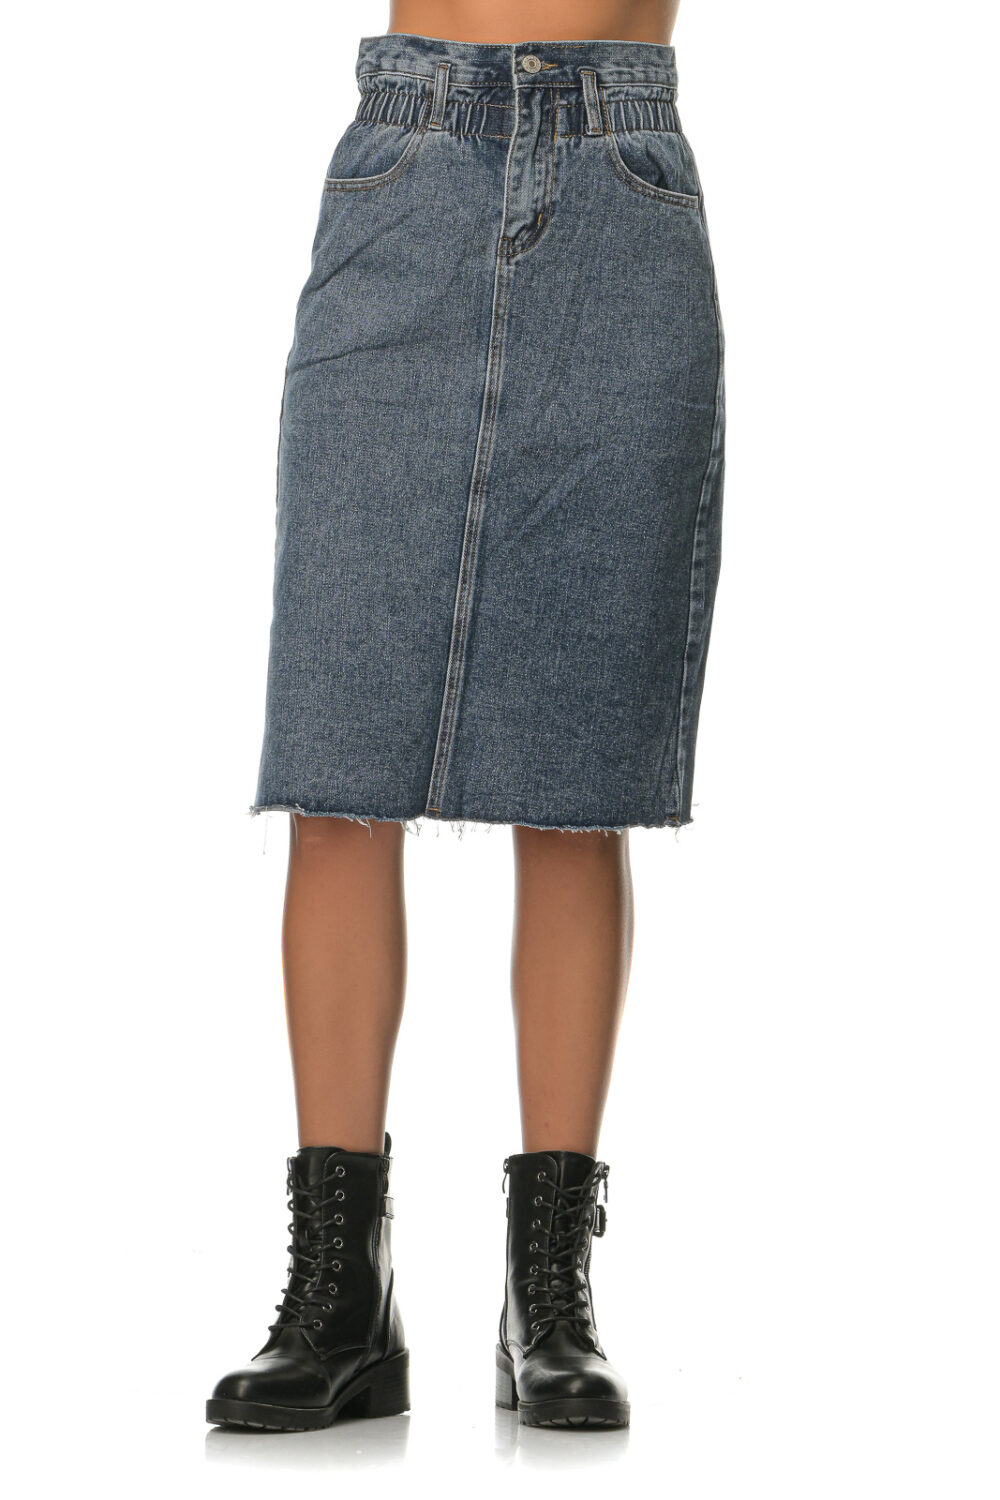 Blue denim high-waisted elastic midi skirt with pleats in the middle